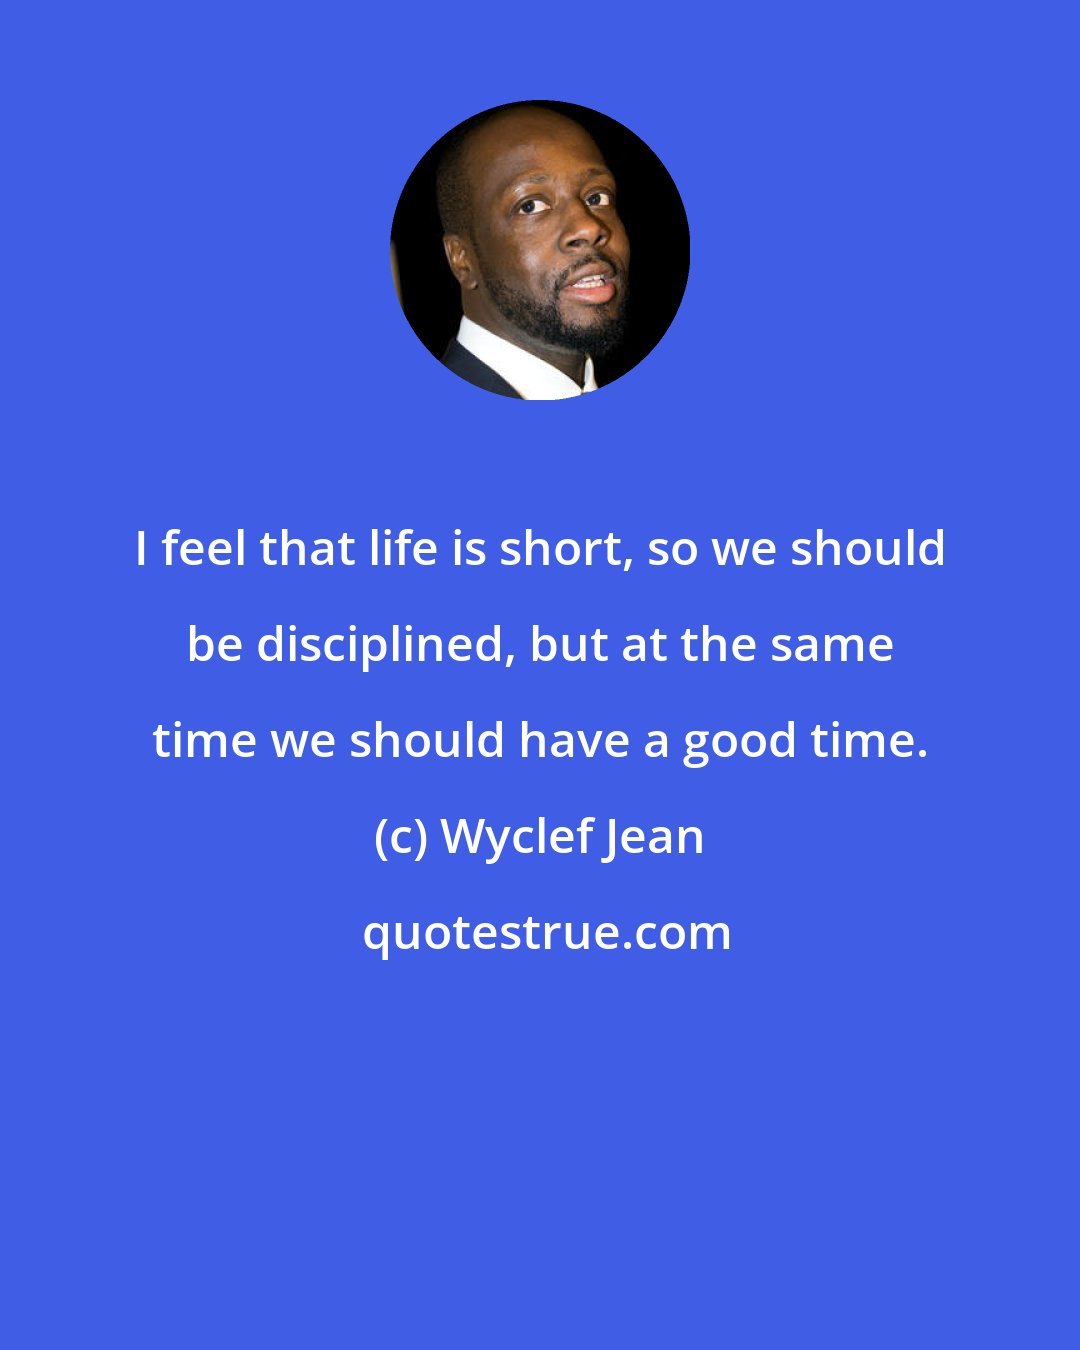 Wyclef Jean: I feel that life is short, so we should be disciplined, but at the same time we should have a good time.